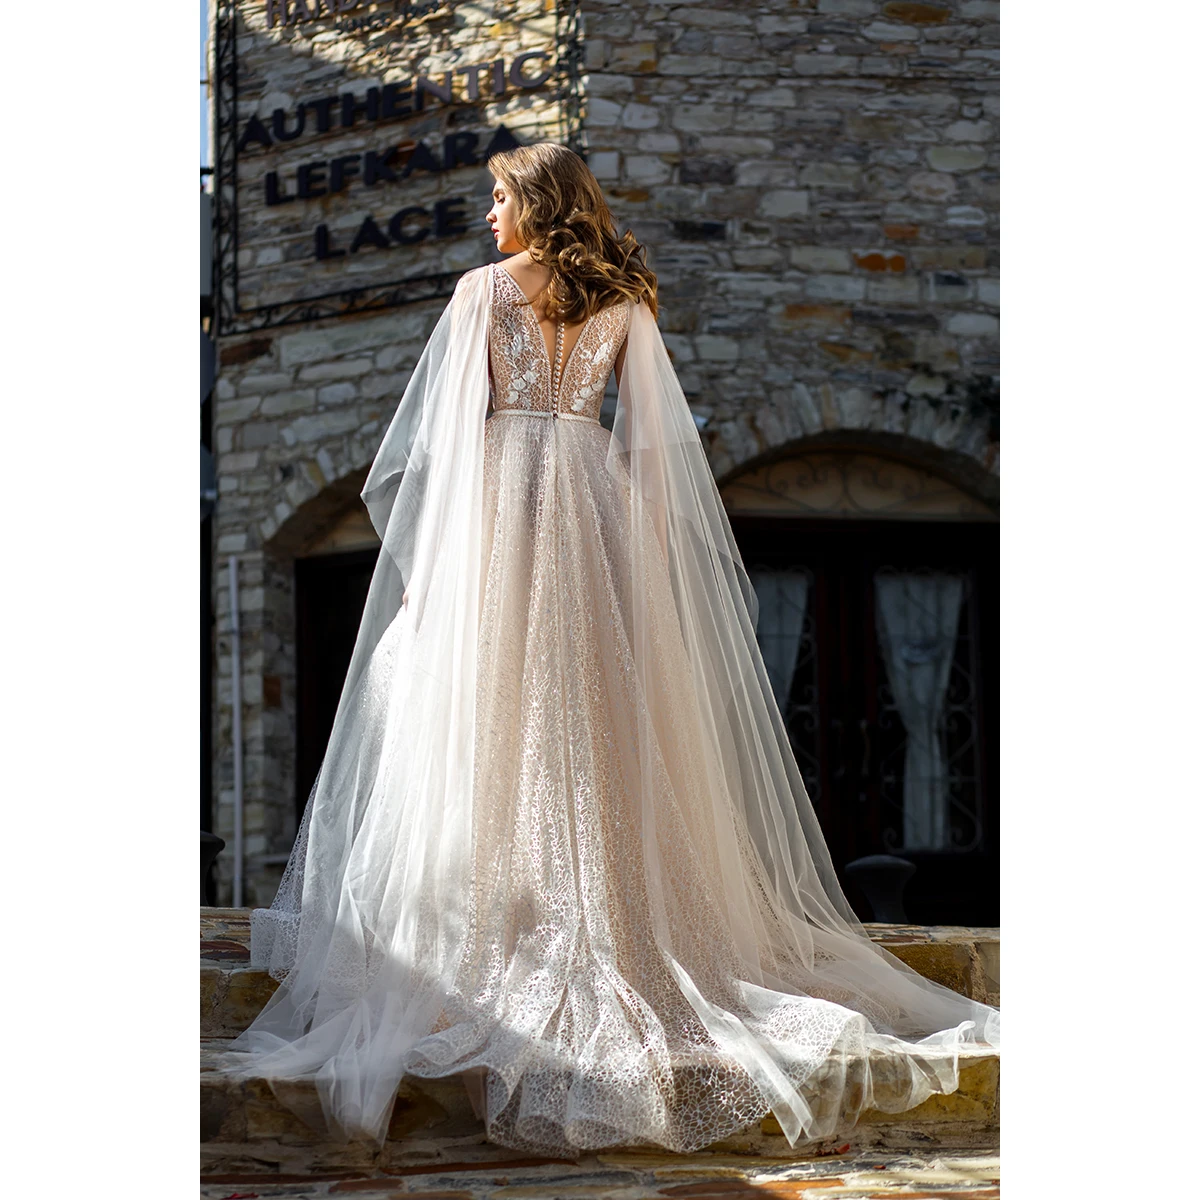 Bridal wedding gowns dress Estelavia &quot;Julie&quot; - soft lines and sharp edges, femininity and strength, tenderness and power